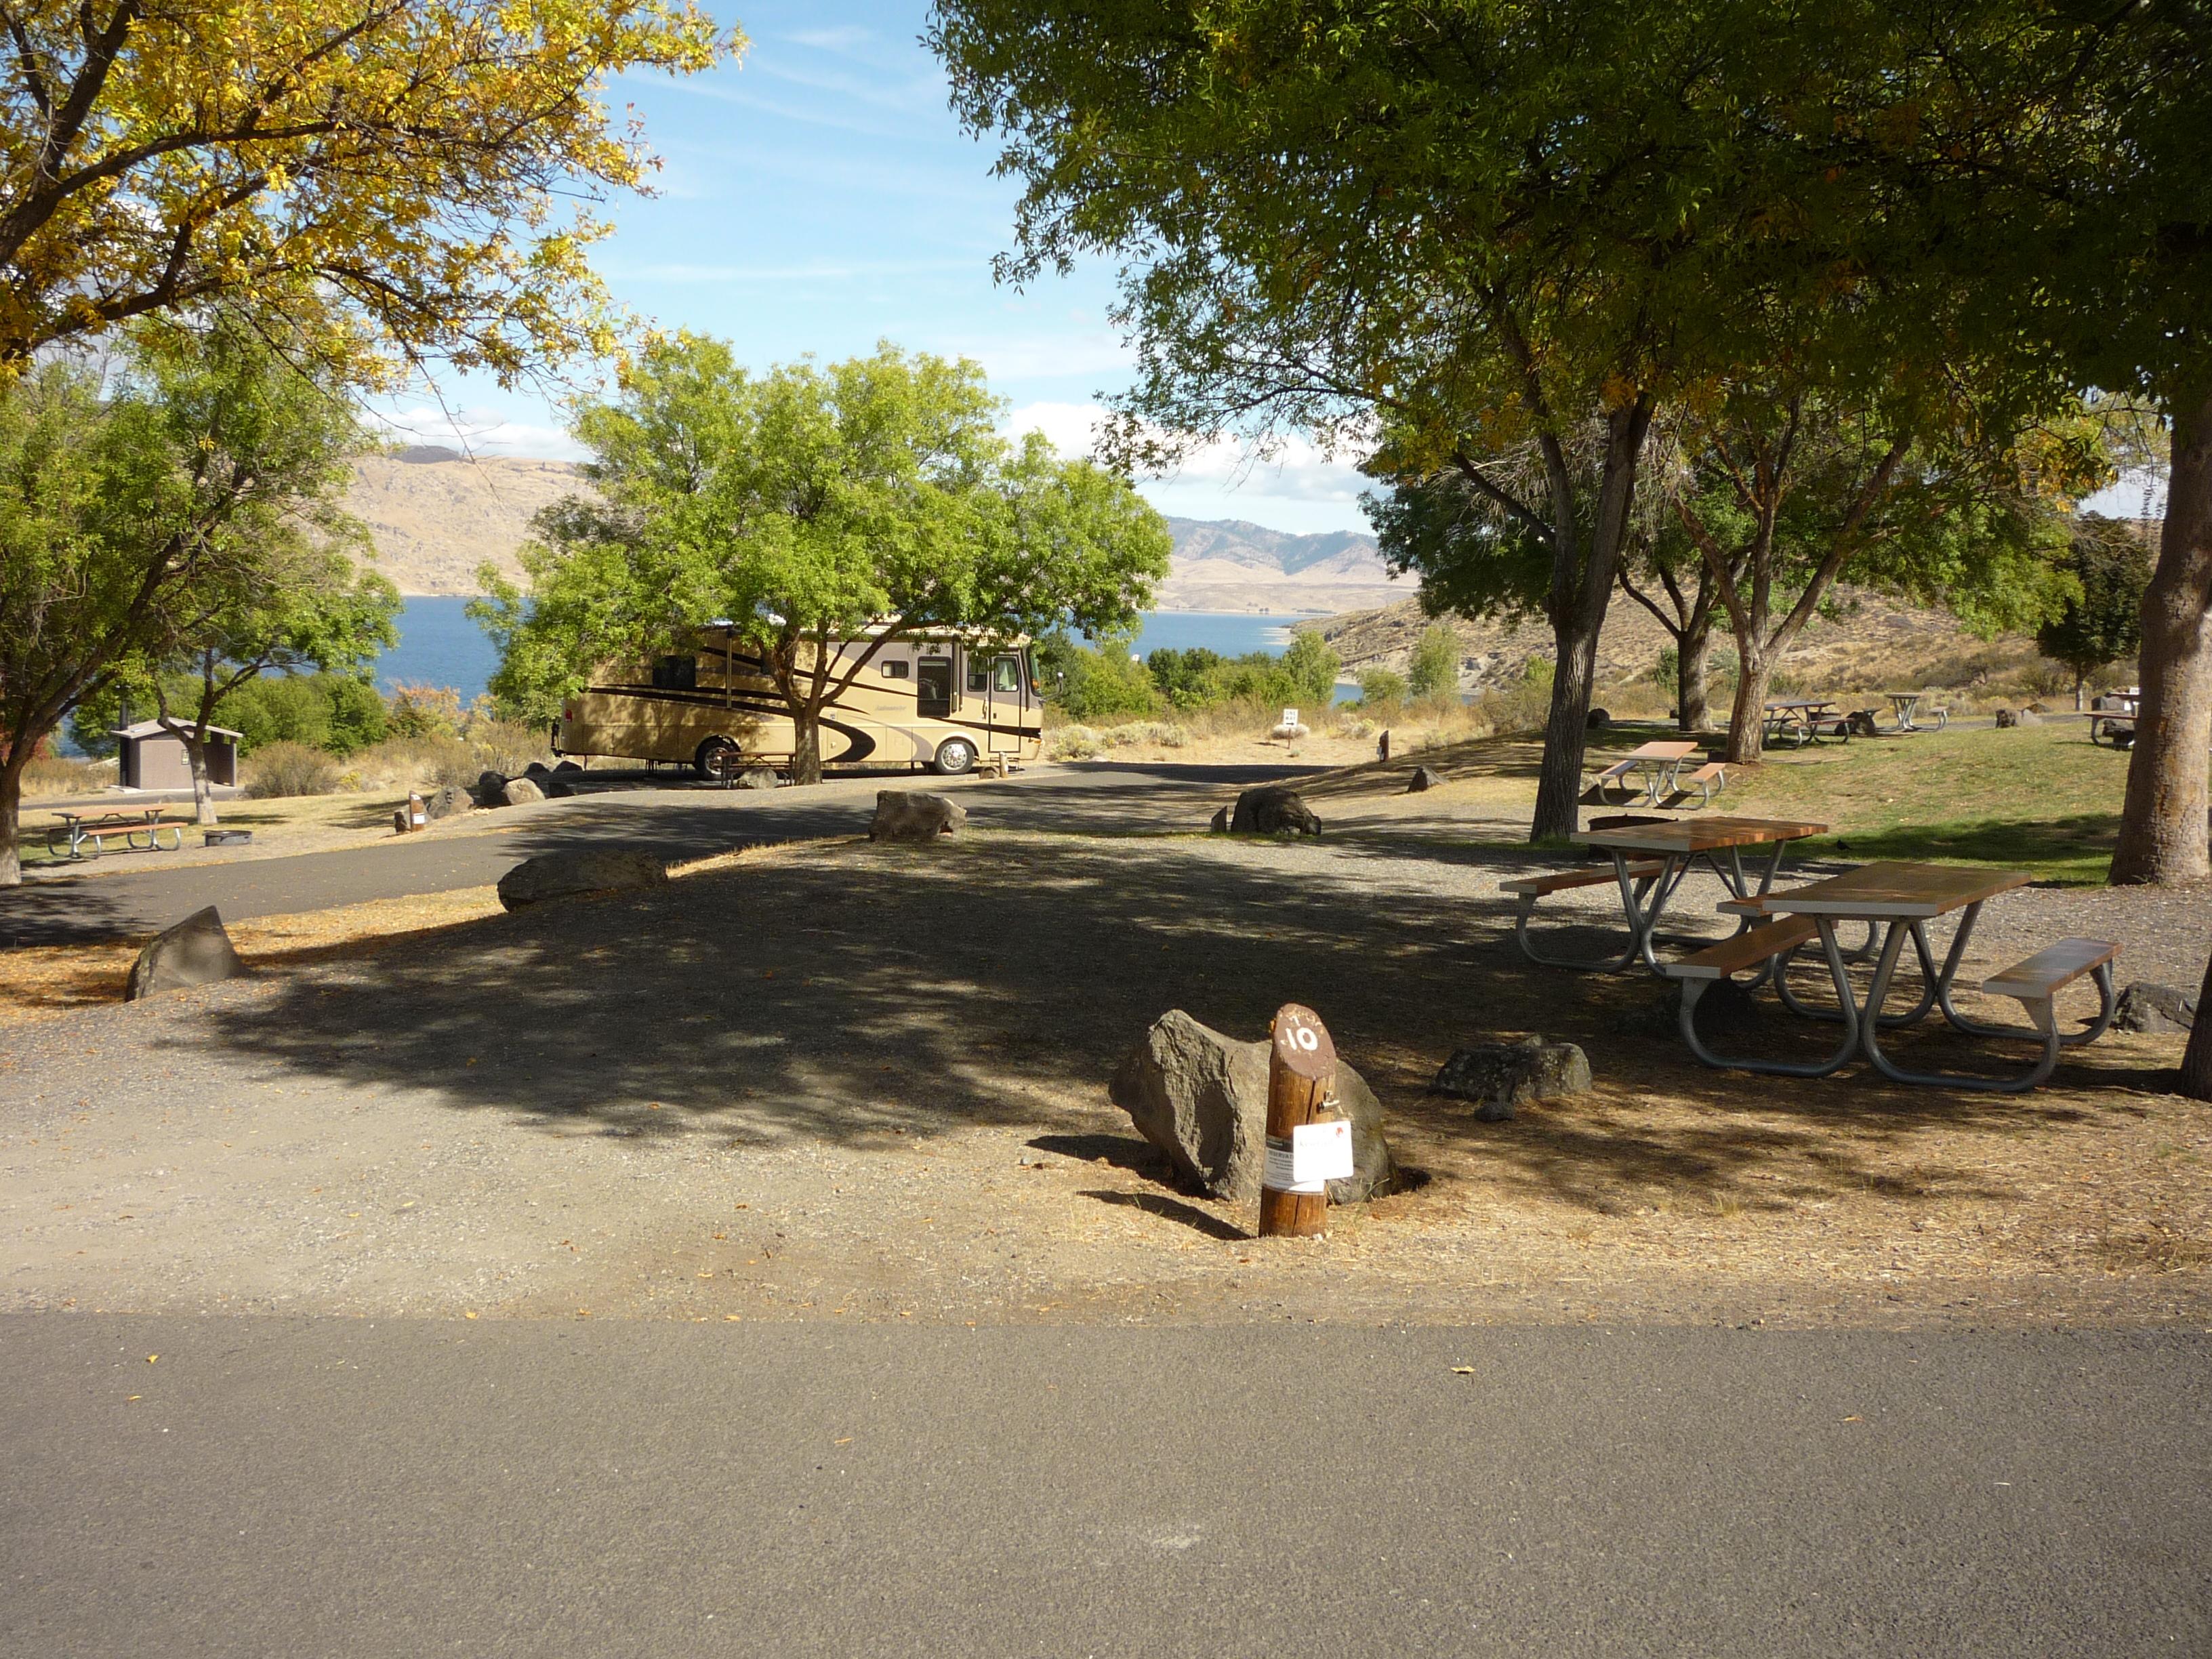 A view of paved access roads and campsites, overlooking the lake.